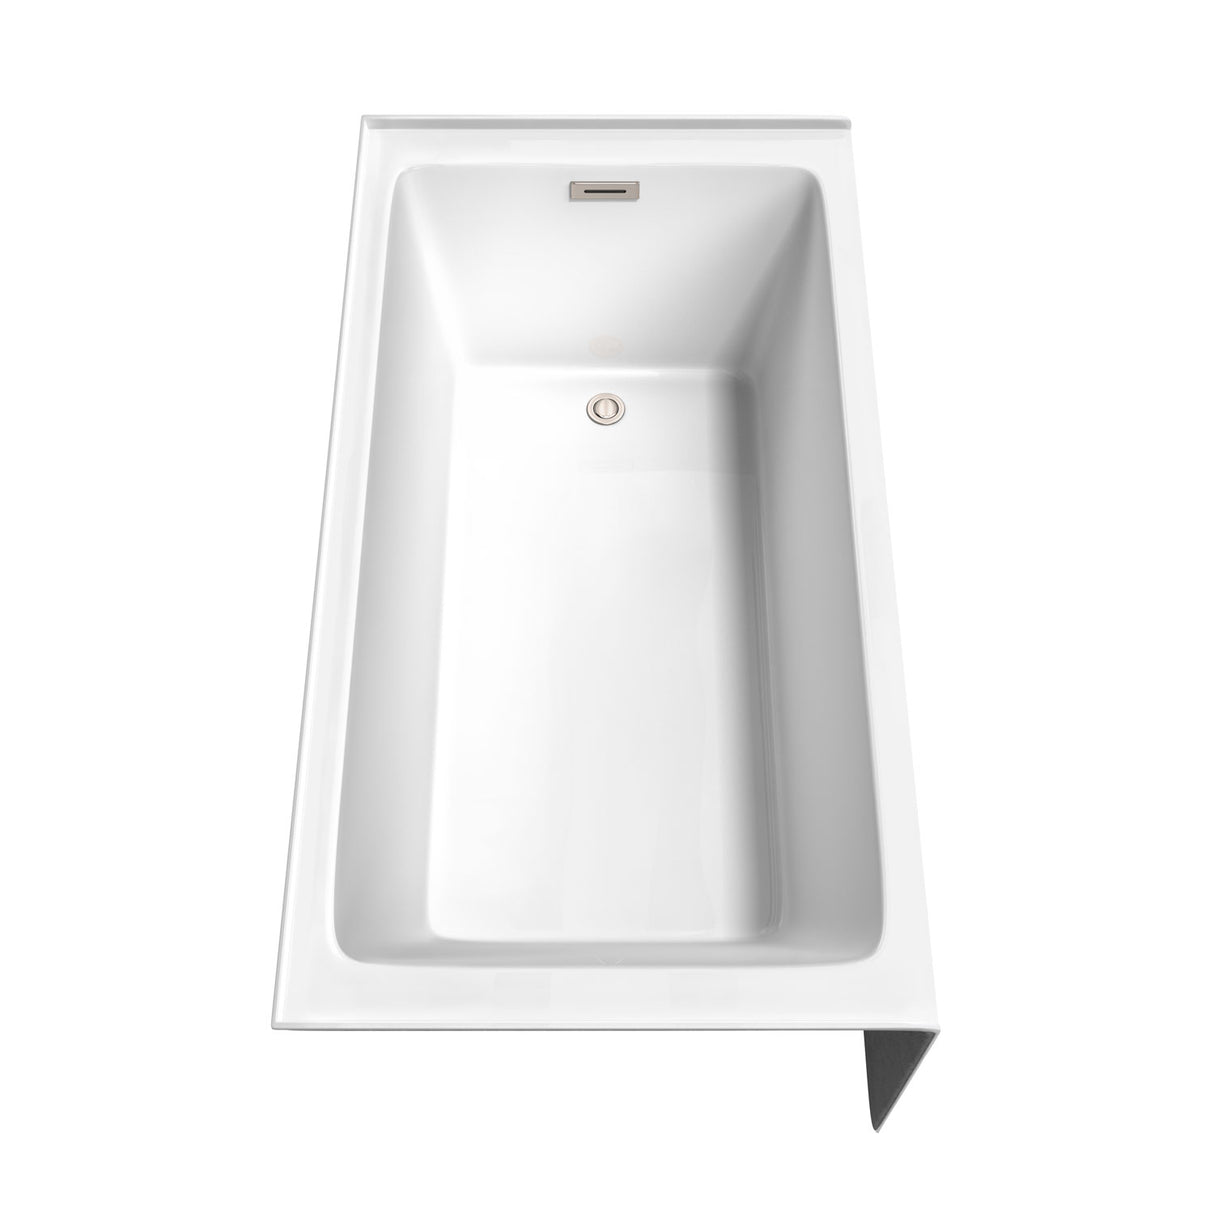 Grayley 60 x 32 Inch Alcove Bathtub in White with Right-Hand Drain and Overflow Trim in Brushed Nickel